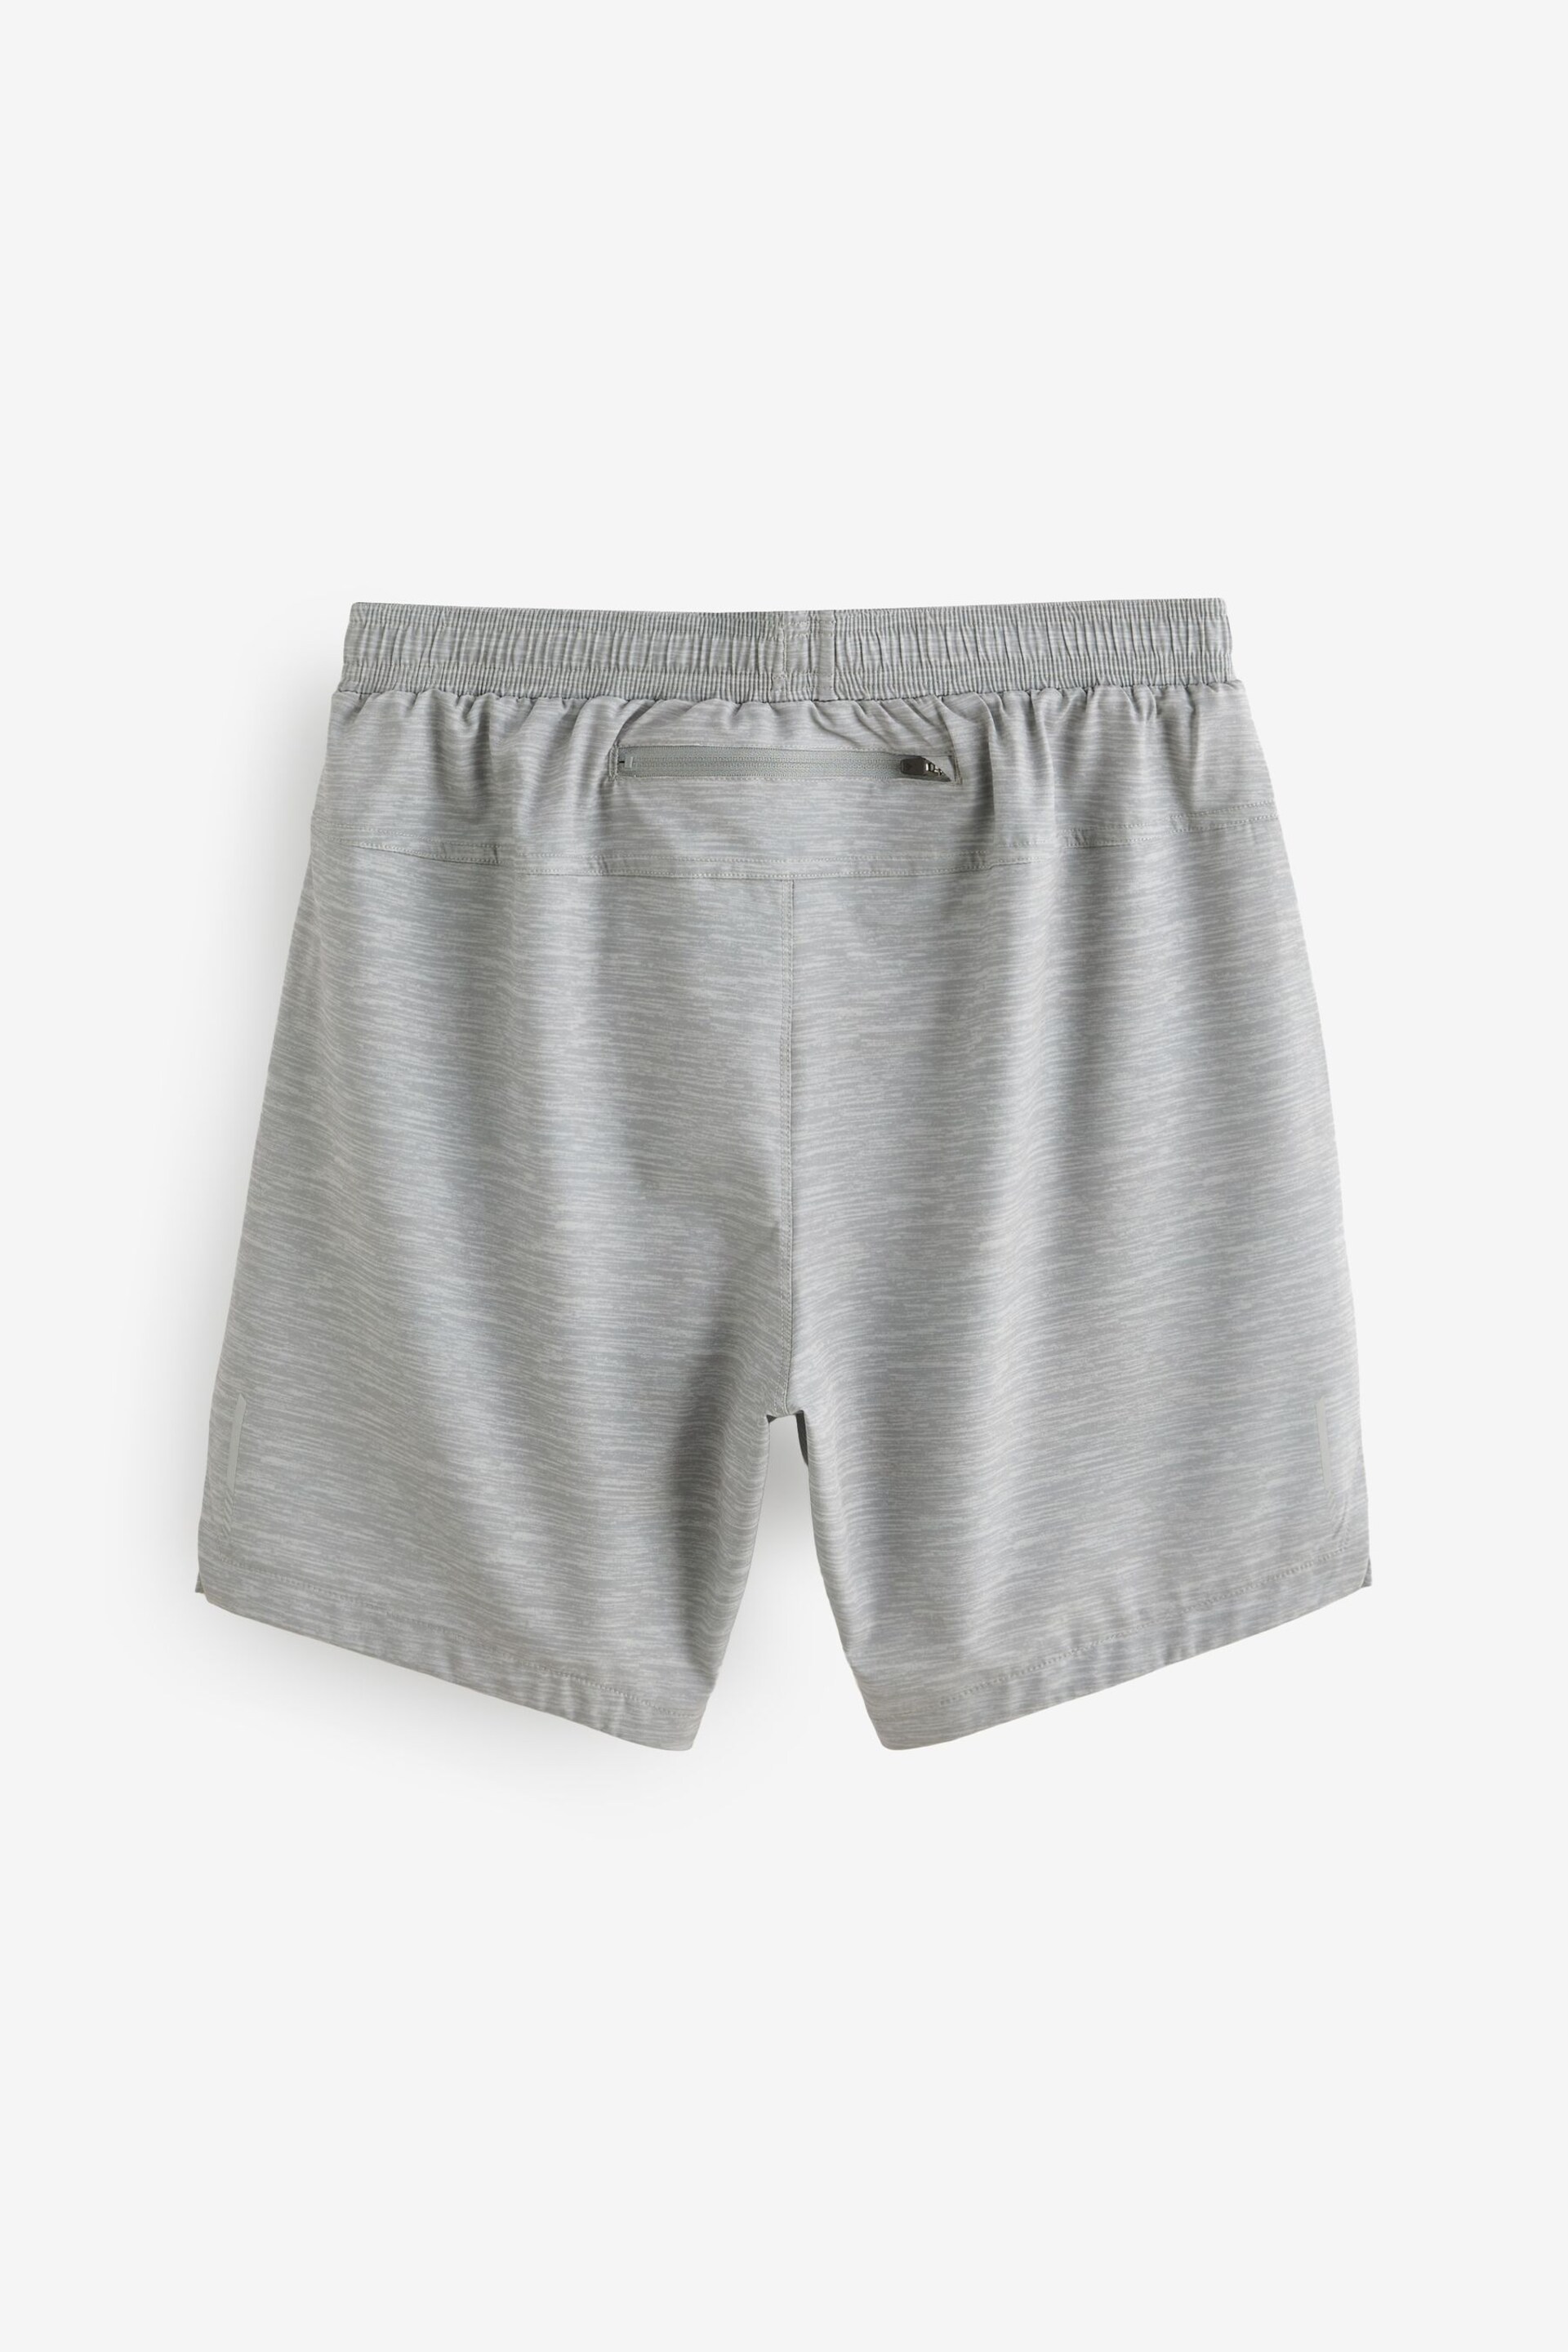 Grey 7 Inch Active Gym Sports Shorts - Image 7 of 10